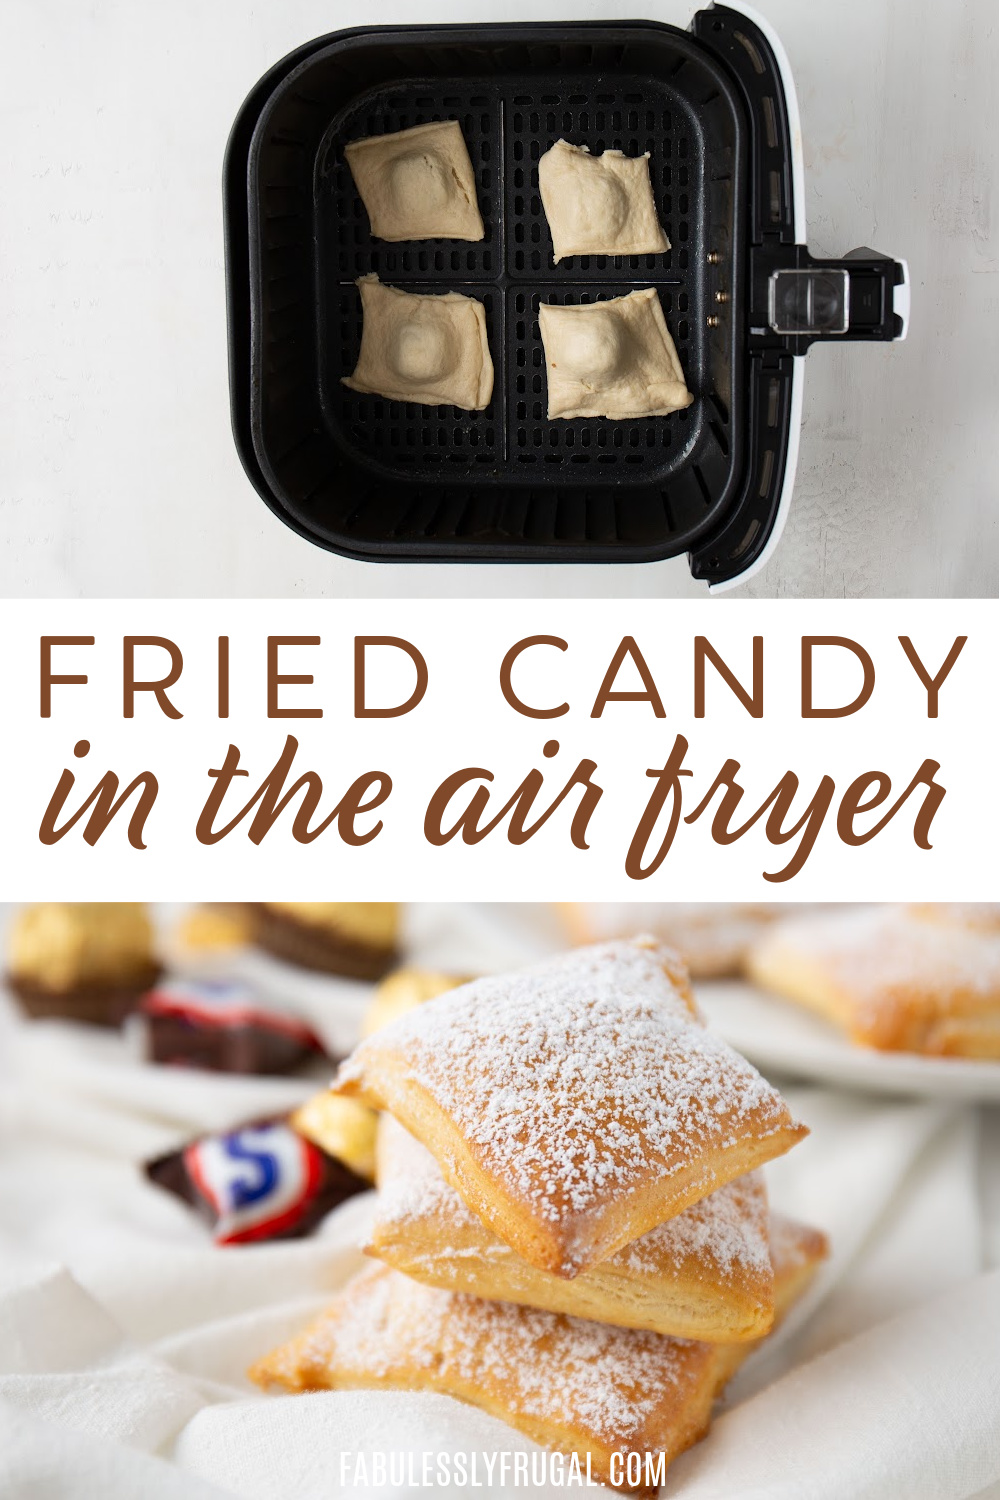 fried candy in the air fryer